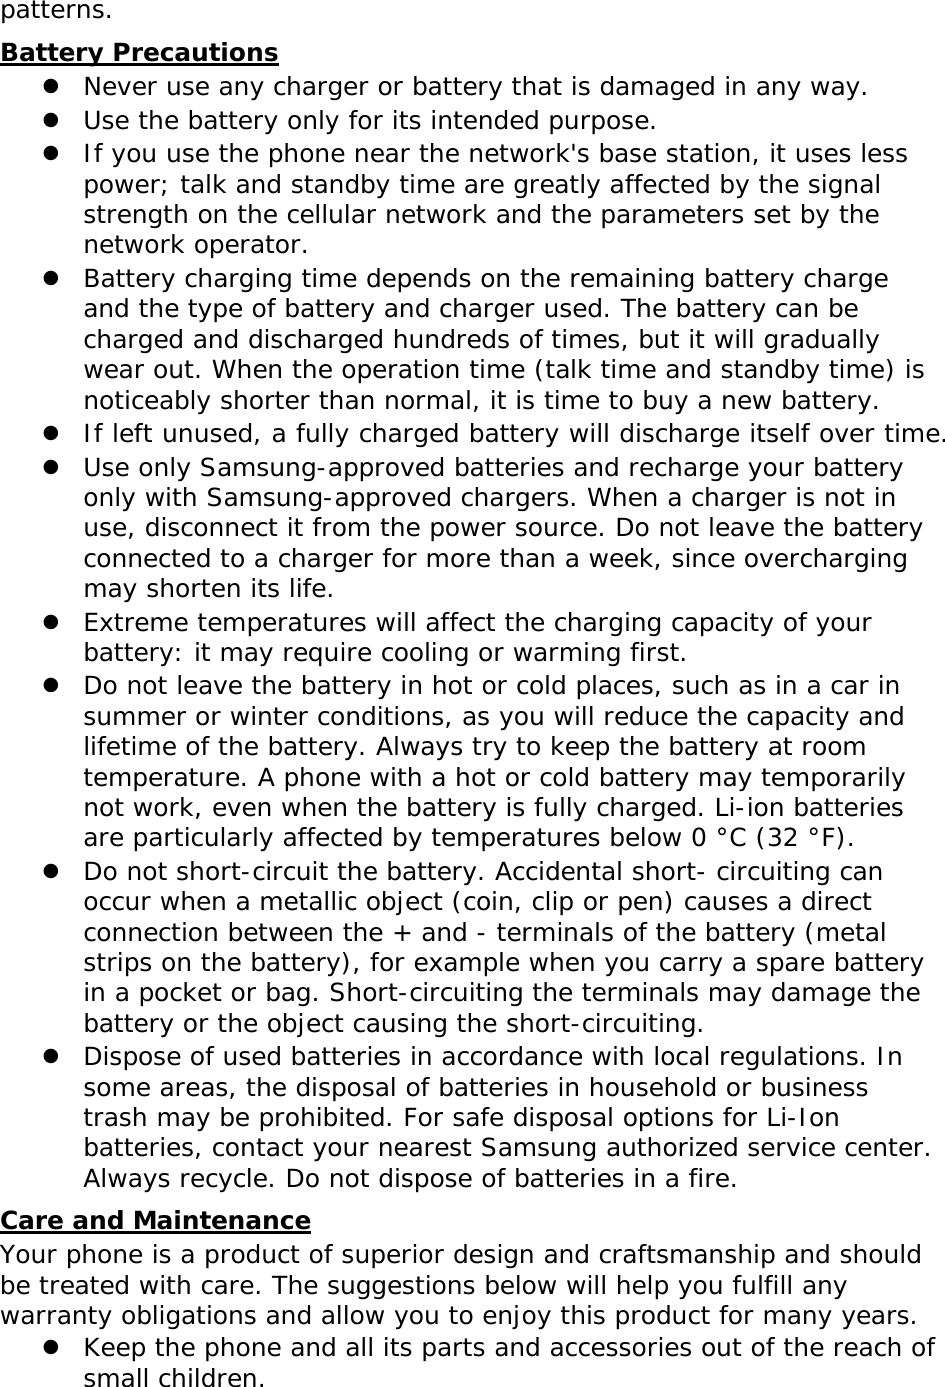 patterns.  Battery Precautions  Never use any charger or battery that is damaged in any way.  Use the battery only for its intended purpose.  If you use the phone near the network&apos;s base station, it uses less power; talk and standby time are greatly affected by the signal strength on the cellular network and the parameters set by the network operator.  Battery charging time depends on the remaining battery charge and the type of battery and charger used. The battery can be charged and discharged hundreds of times, but it will gradually wear out. When the operation time (talk time and standby time) is noticeably shorter than normal, it is time to buy a new battery.  If left unused, a fully charged battery will discharge itself over time.  Use only Samsung-approved batteries and recharge your battery only with Samsung-approved chargers. When a charger is not in use, disconnect it from the power source. Do not leave the battery connected to a charger for more than a week, since overcharging may shorten its life.  Extreme temperatures will affect the charging capacity of your battery: it may require cooling or warming first.  Do not leave the battery in hot or cold places, such as in a car in summer or winter conditions, as you will reduce the capacity and lifetime of the battery. Always try to keep the battery at room temperature. A phone with a hot or cold battery may temporarily not work, even when the battery is fully charged. Li-ion batteries are particularly affected by temperatures below 0 °C (32 °F).  Do not short-circuit the battery. Accidental short- circuiting can occur when a metallic object (coin, clip or pen) causes a direct connection between the + and - terminals of the battery (metal strips on the battery), for example when you carry a spare battery in a pocket or bag. Short-circuiting the terminals may damage the battery or the object causing the short-circuiting.  Dispose of used batteries in accordance with local regulations. In some areas, the disposal of batteries in household or business trash may be prohibited. For safe disposal options for Li-Ion batteries, contact your nearest Samsung authorized service center. Always recycle. Do not dispose of batteries in a fire. Care and Maintenance Your phone is a product of superior design and craftsmanship and should be treated with care. The suggestions below will help you fulfill any warranty obligations and allow you to enjoy this product for many years.  Keep the phone and all its parts and accessories out of the reach of small children. 